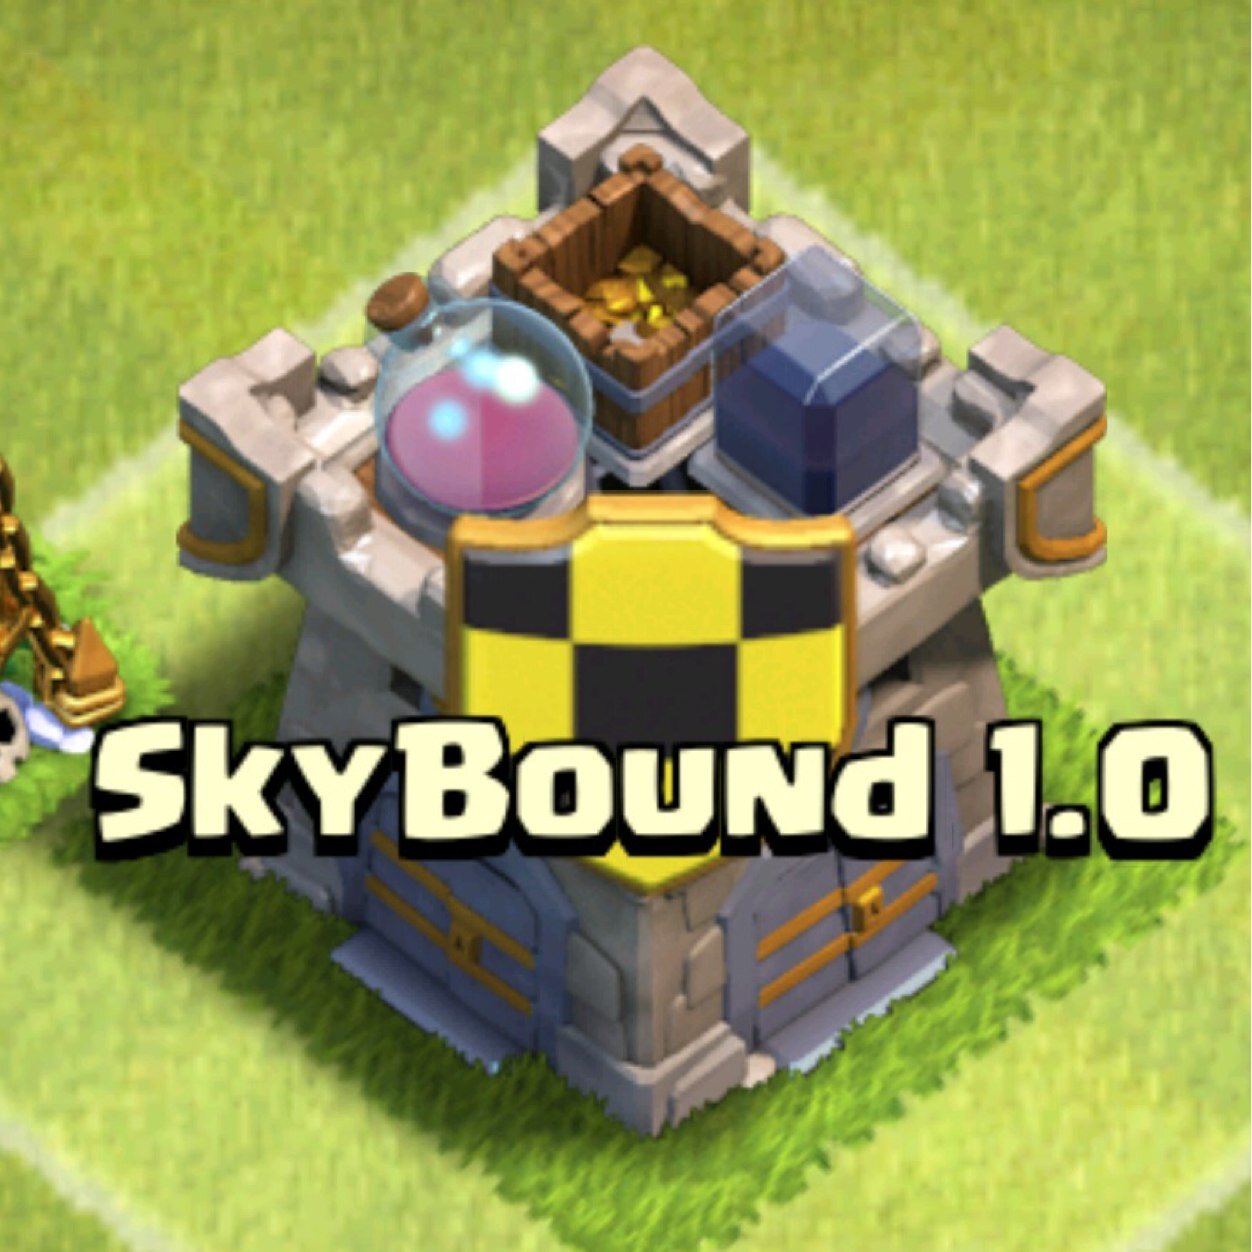 The one and only SkyBound clan family! Clash of Clans strategy and clan updates often! SkyBound 1.0 and SkyBound 2.0 are the clans so far, check em out!